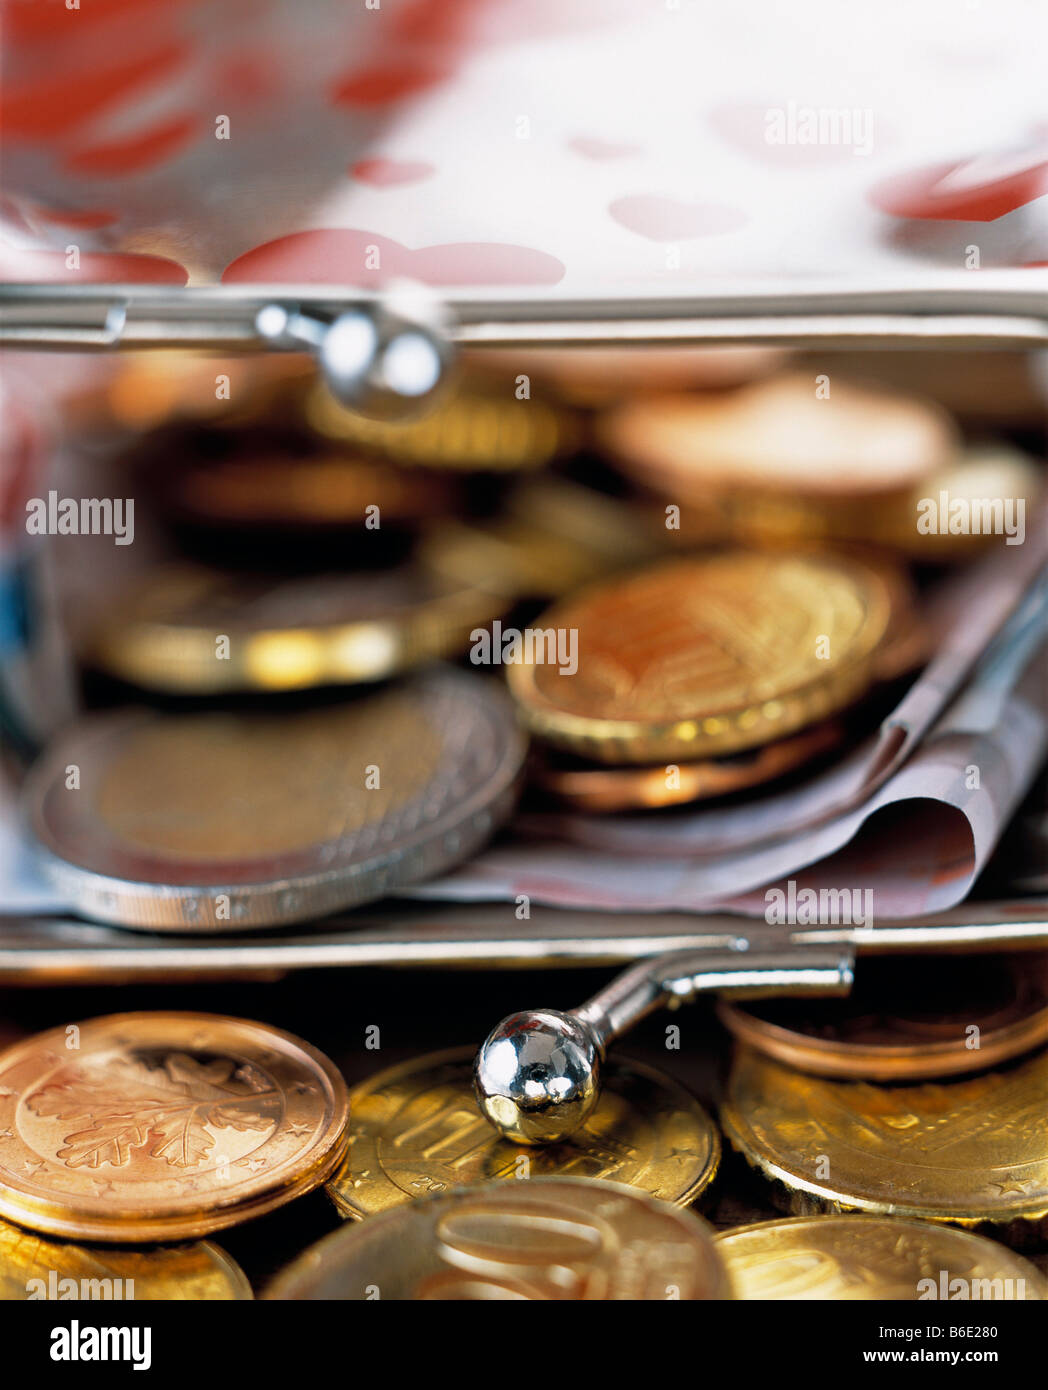 Euro coins spilling out of a purse containing folded Euro notes. Stock Photo